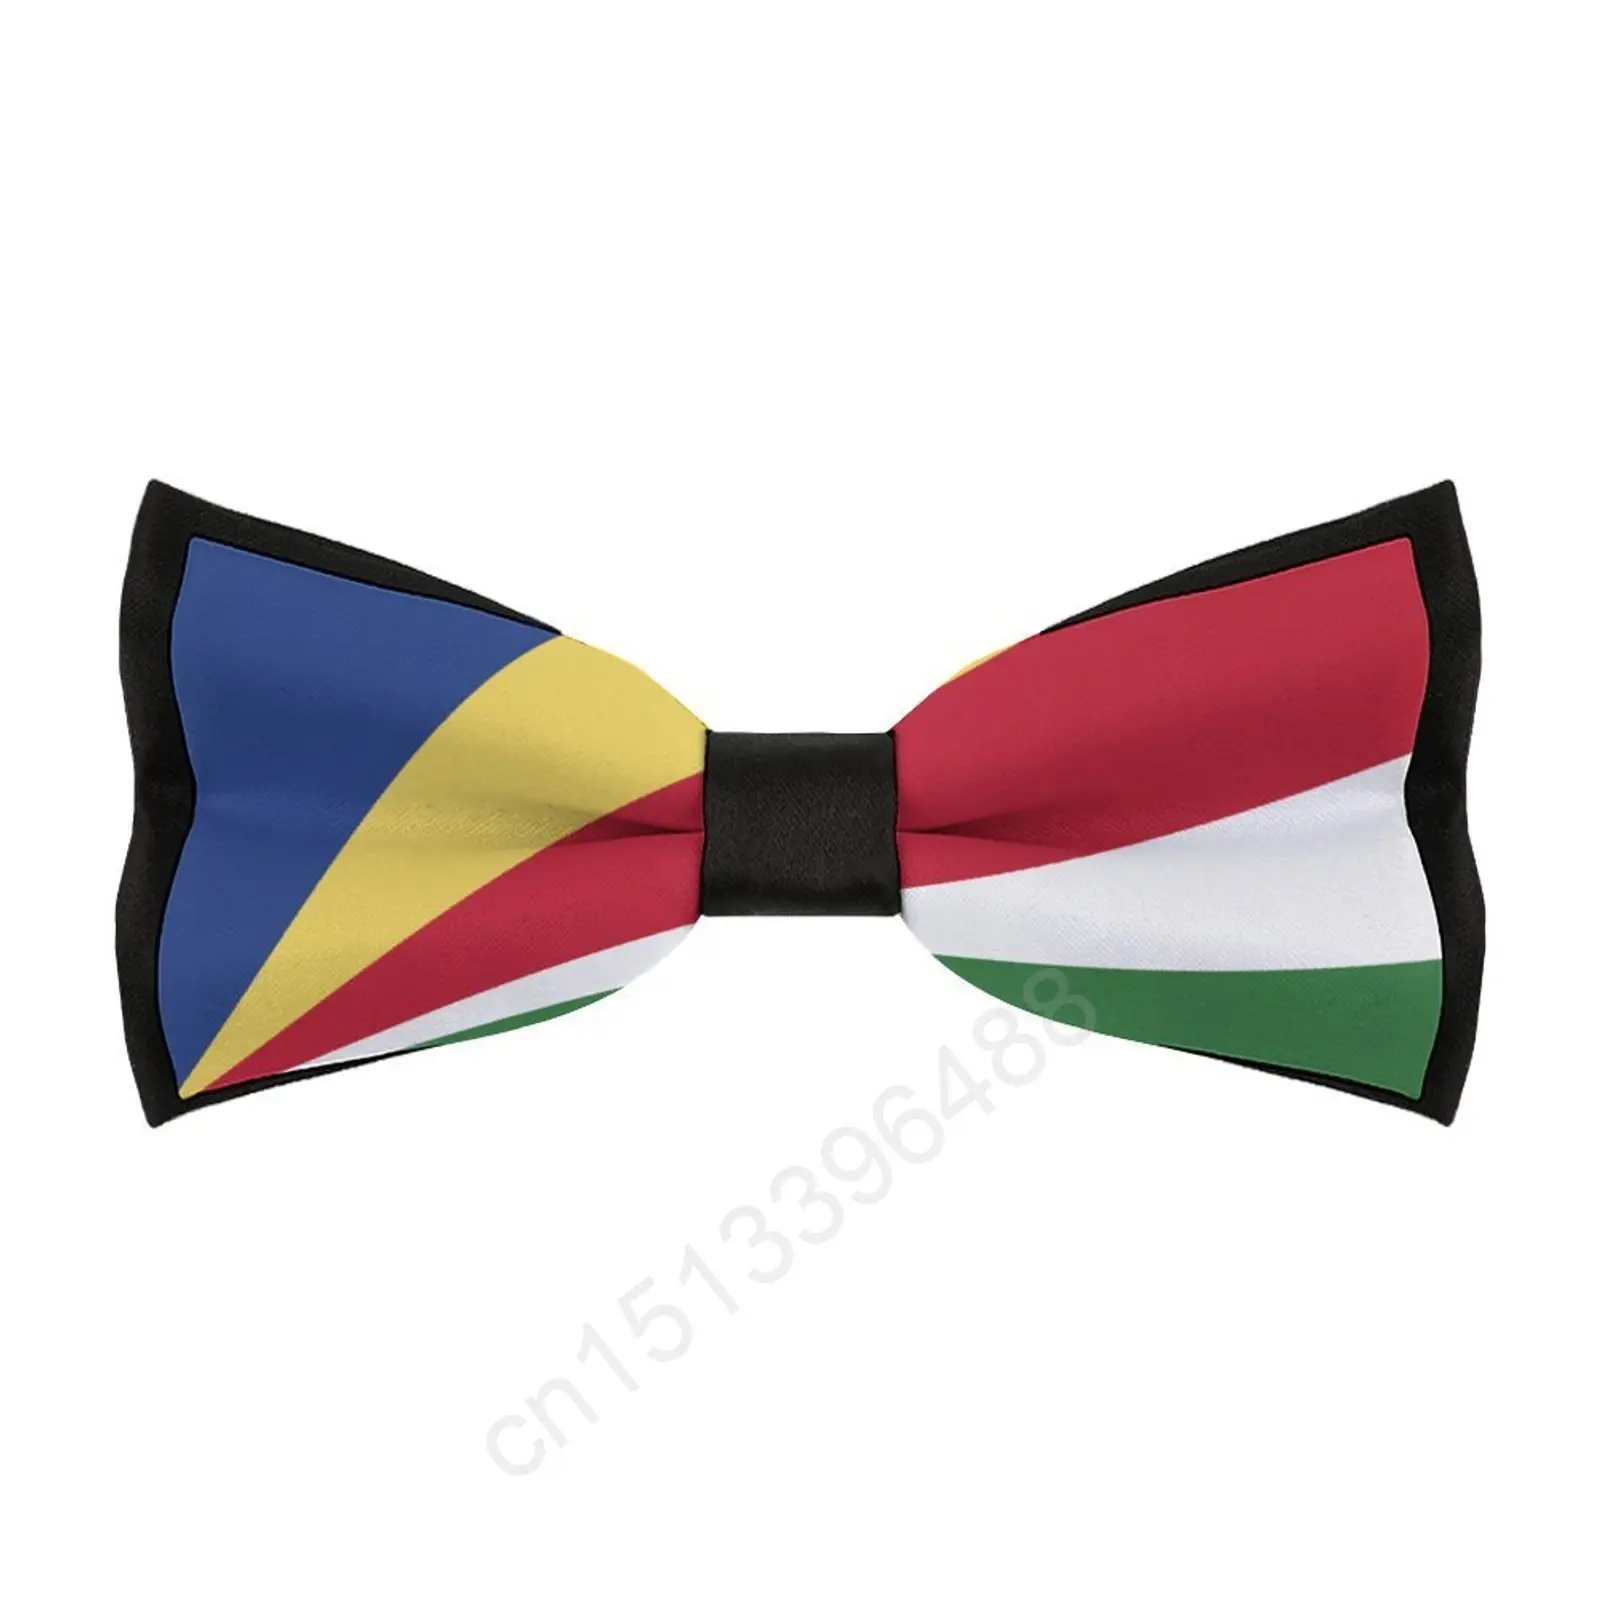 

New Polyester Seychelles Flag Bowtie for Men Fashion Casual Men's Bow Ties Cravat Neckwear For Wedding Party Suits Tie